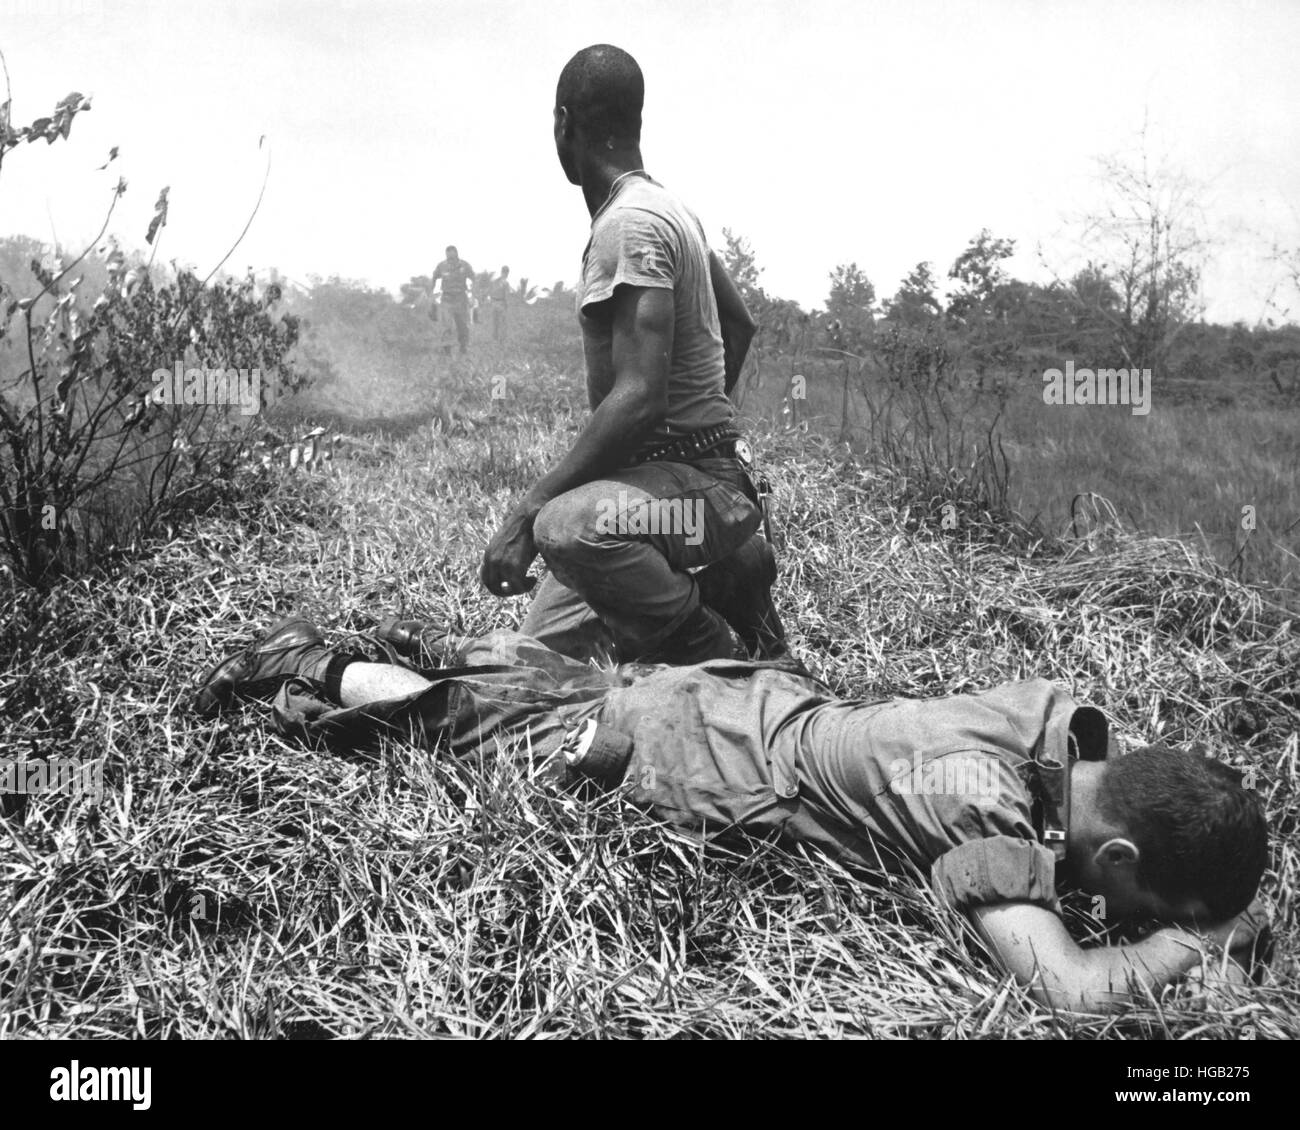 A young American lieutenant is treated by a medic in Vietnam, 1966. Stock Photo